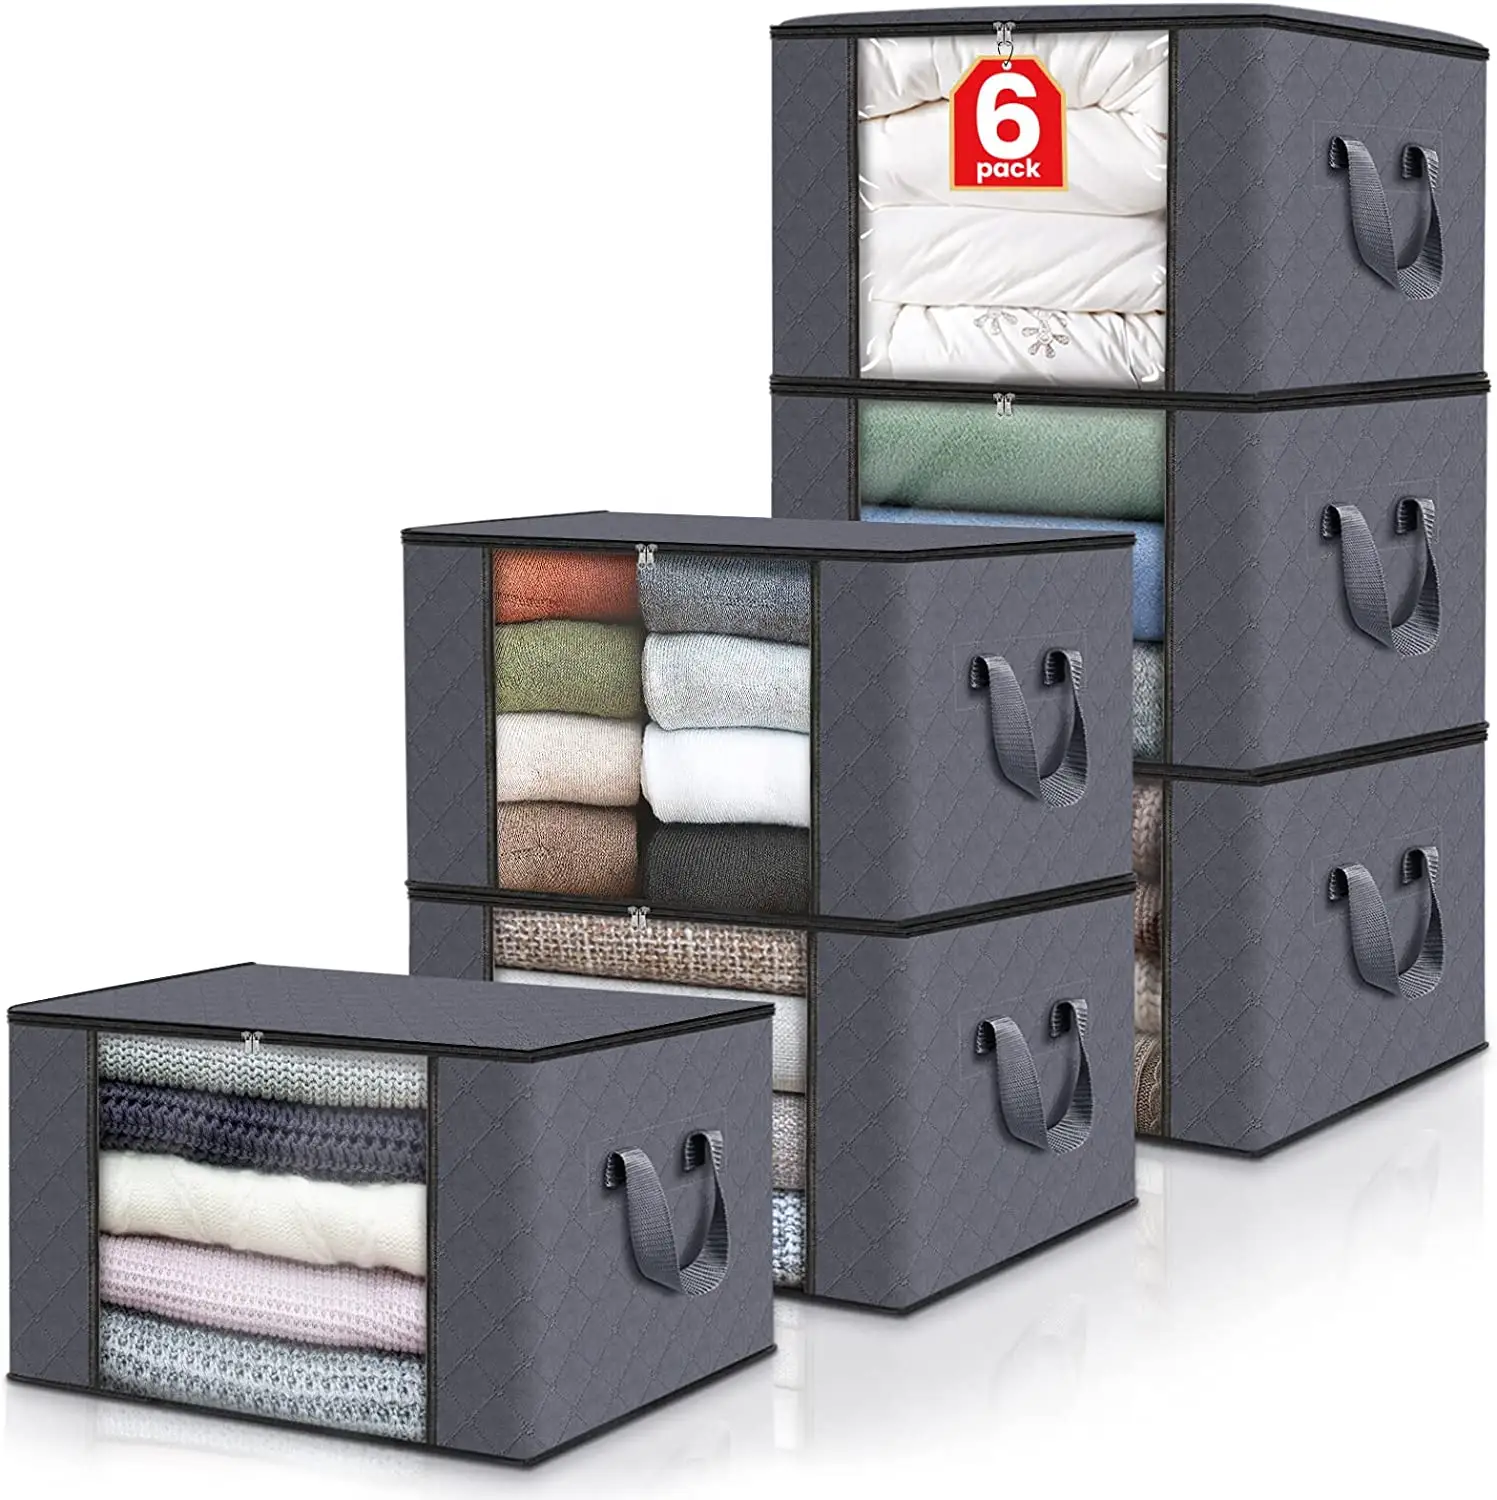 Pop up foldable blanket tidy up bedroom clothes storage gray storage box with cover